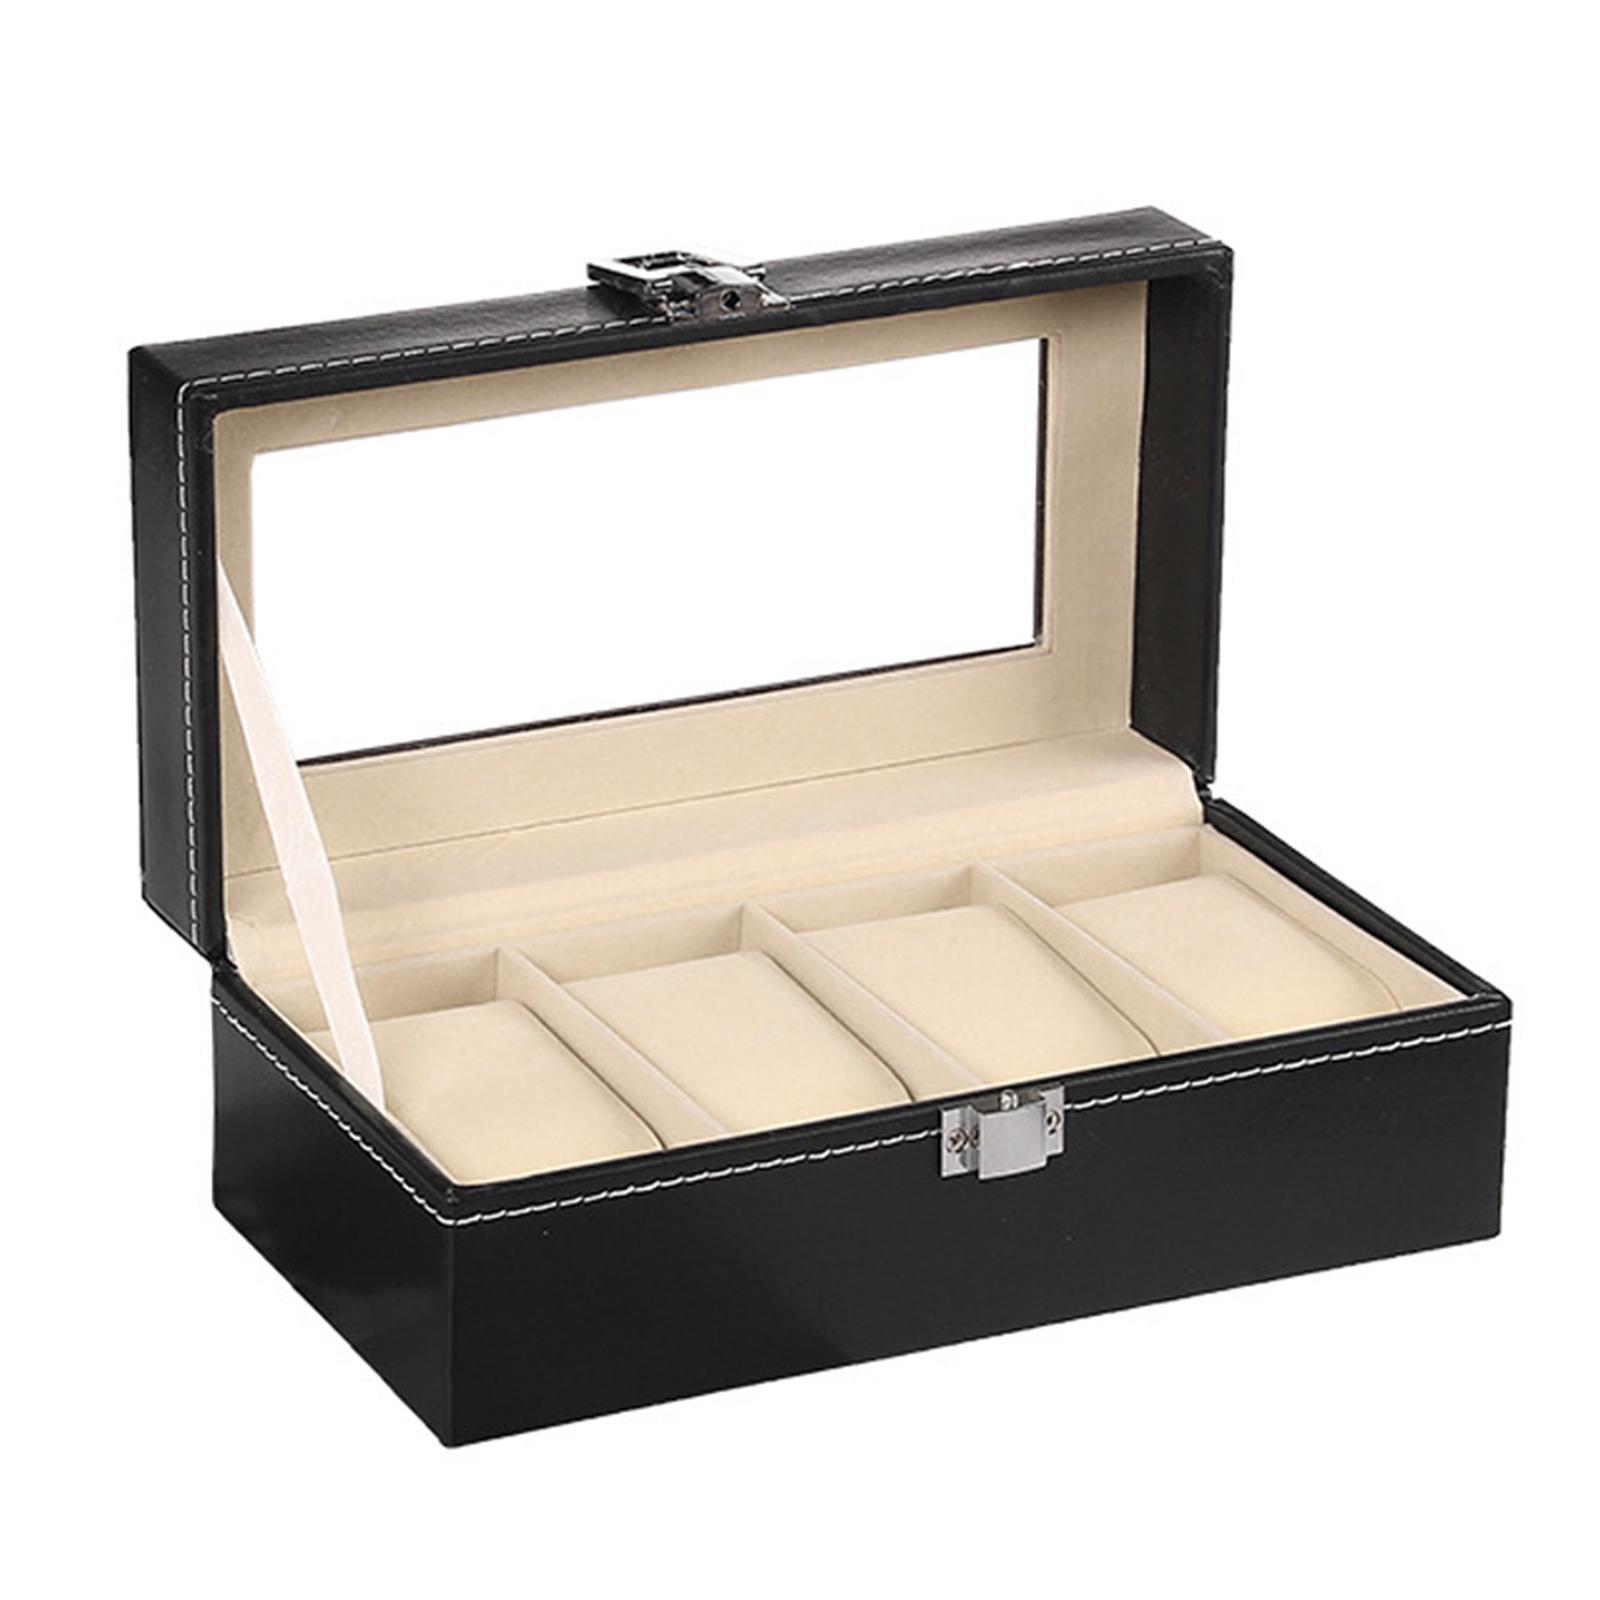 Watch Box, Elegant Portable Watch Collection Box Case Organizer for Storage and Display for Men & Women